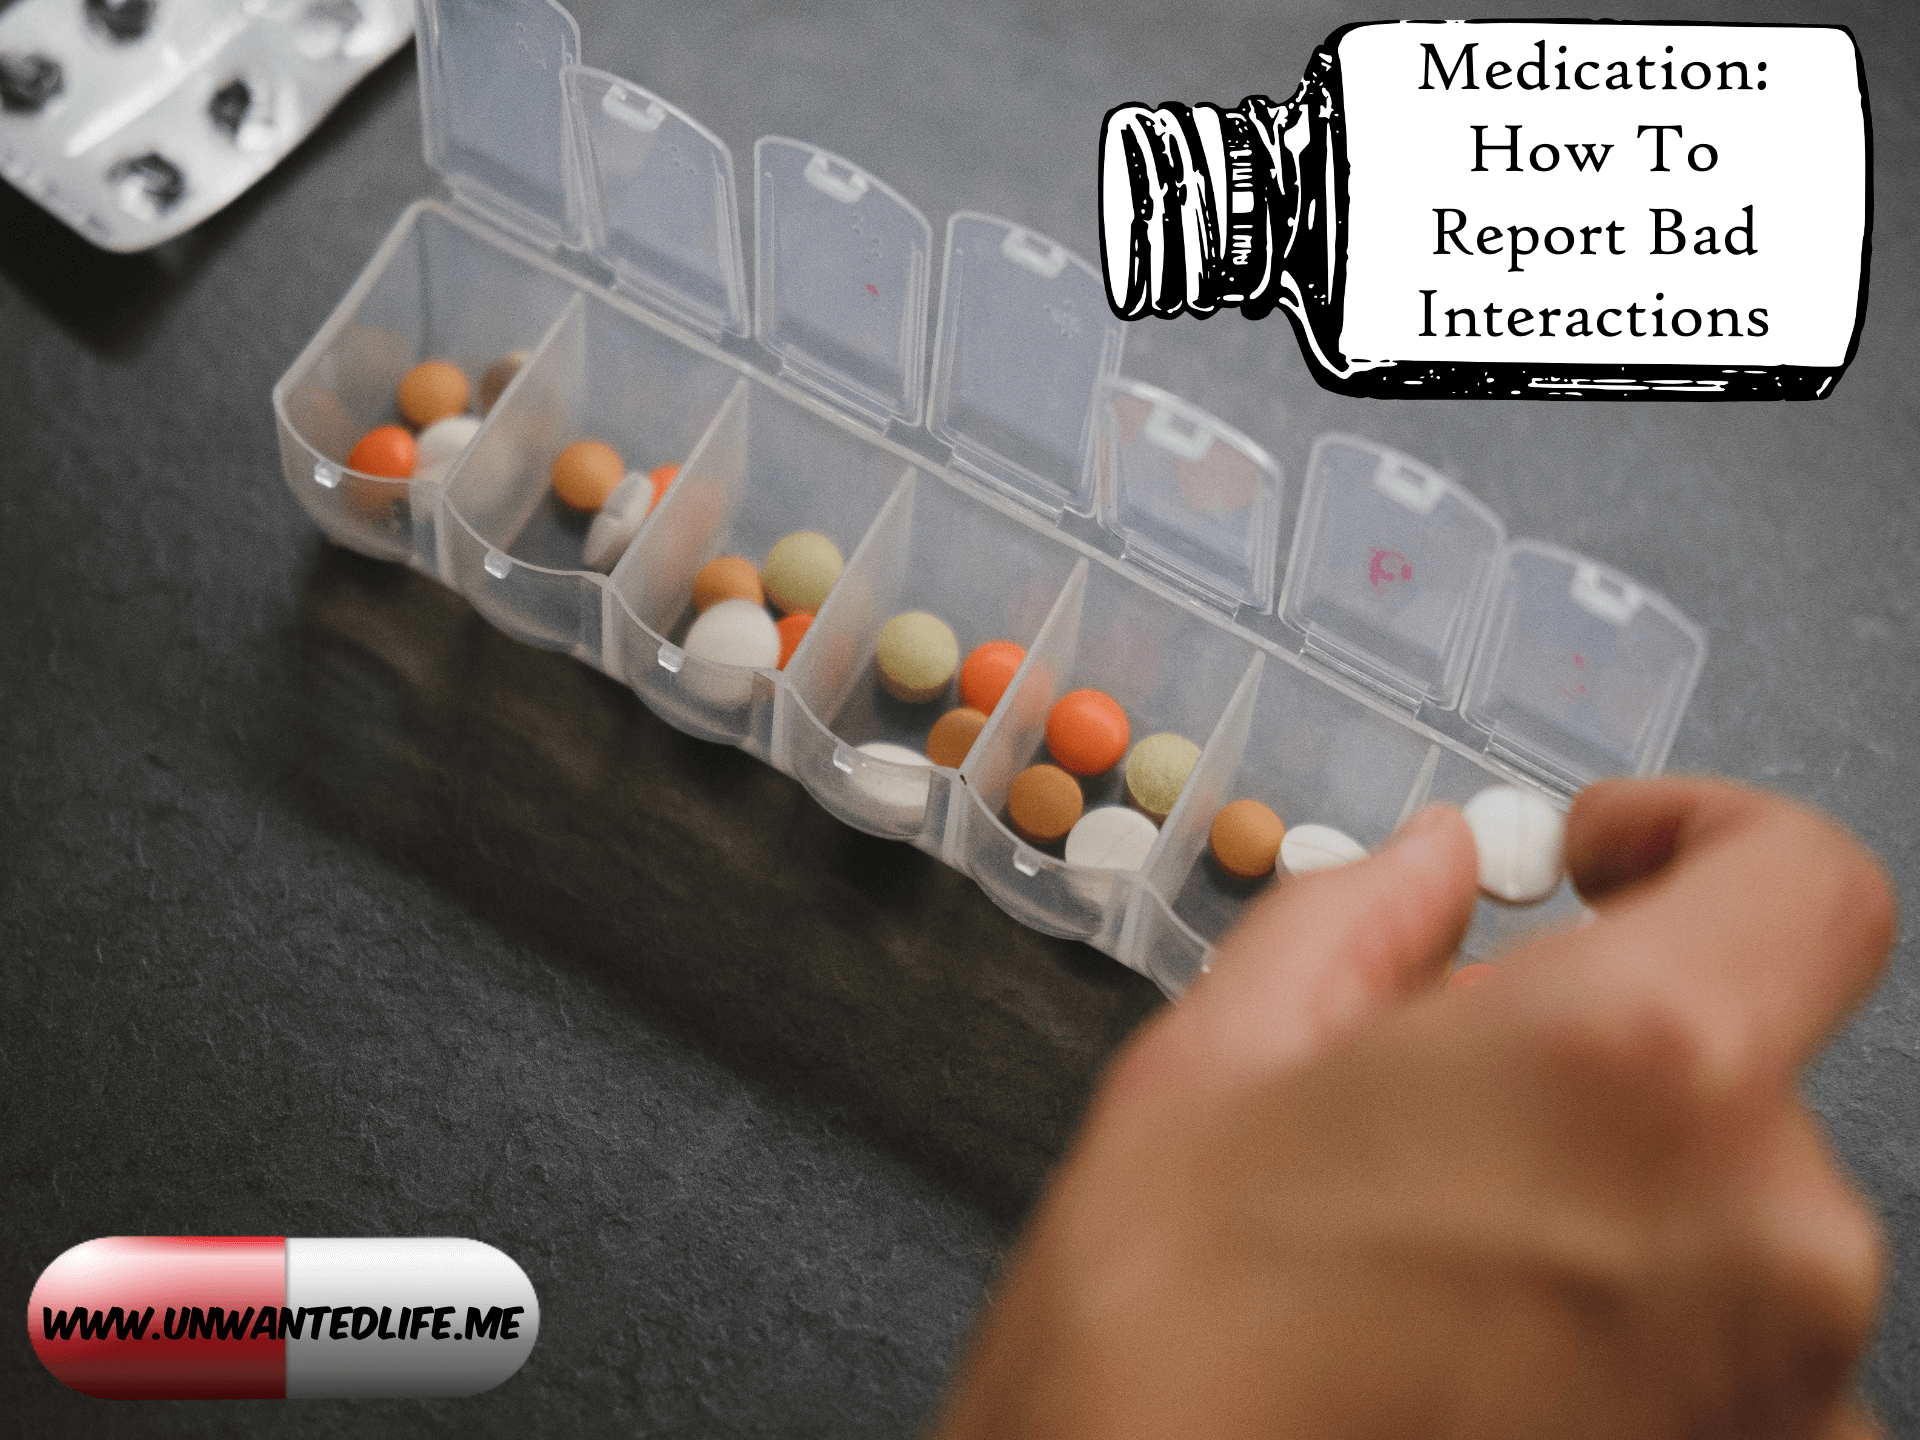 A person sorting medication into a seven day medication box to represent - Medication: How To Report Bad Interactions